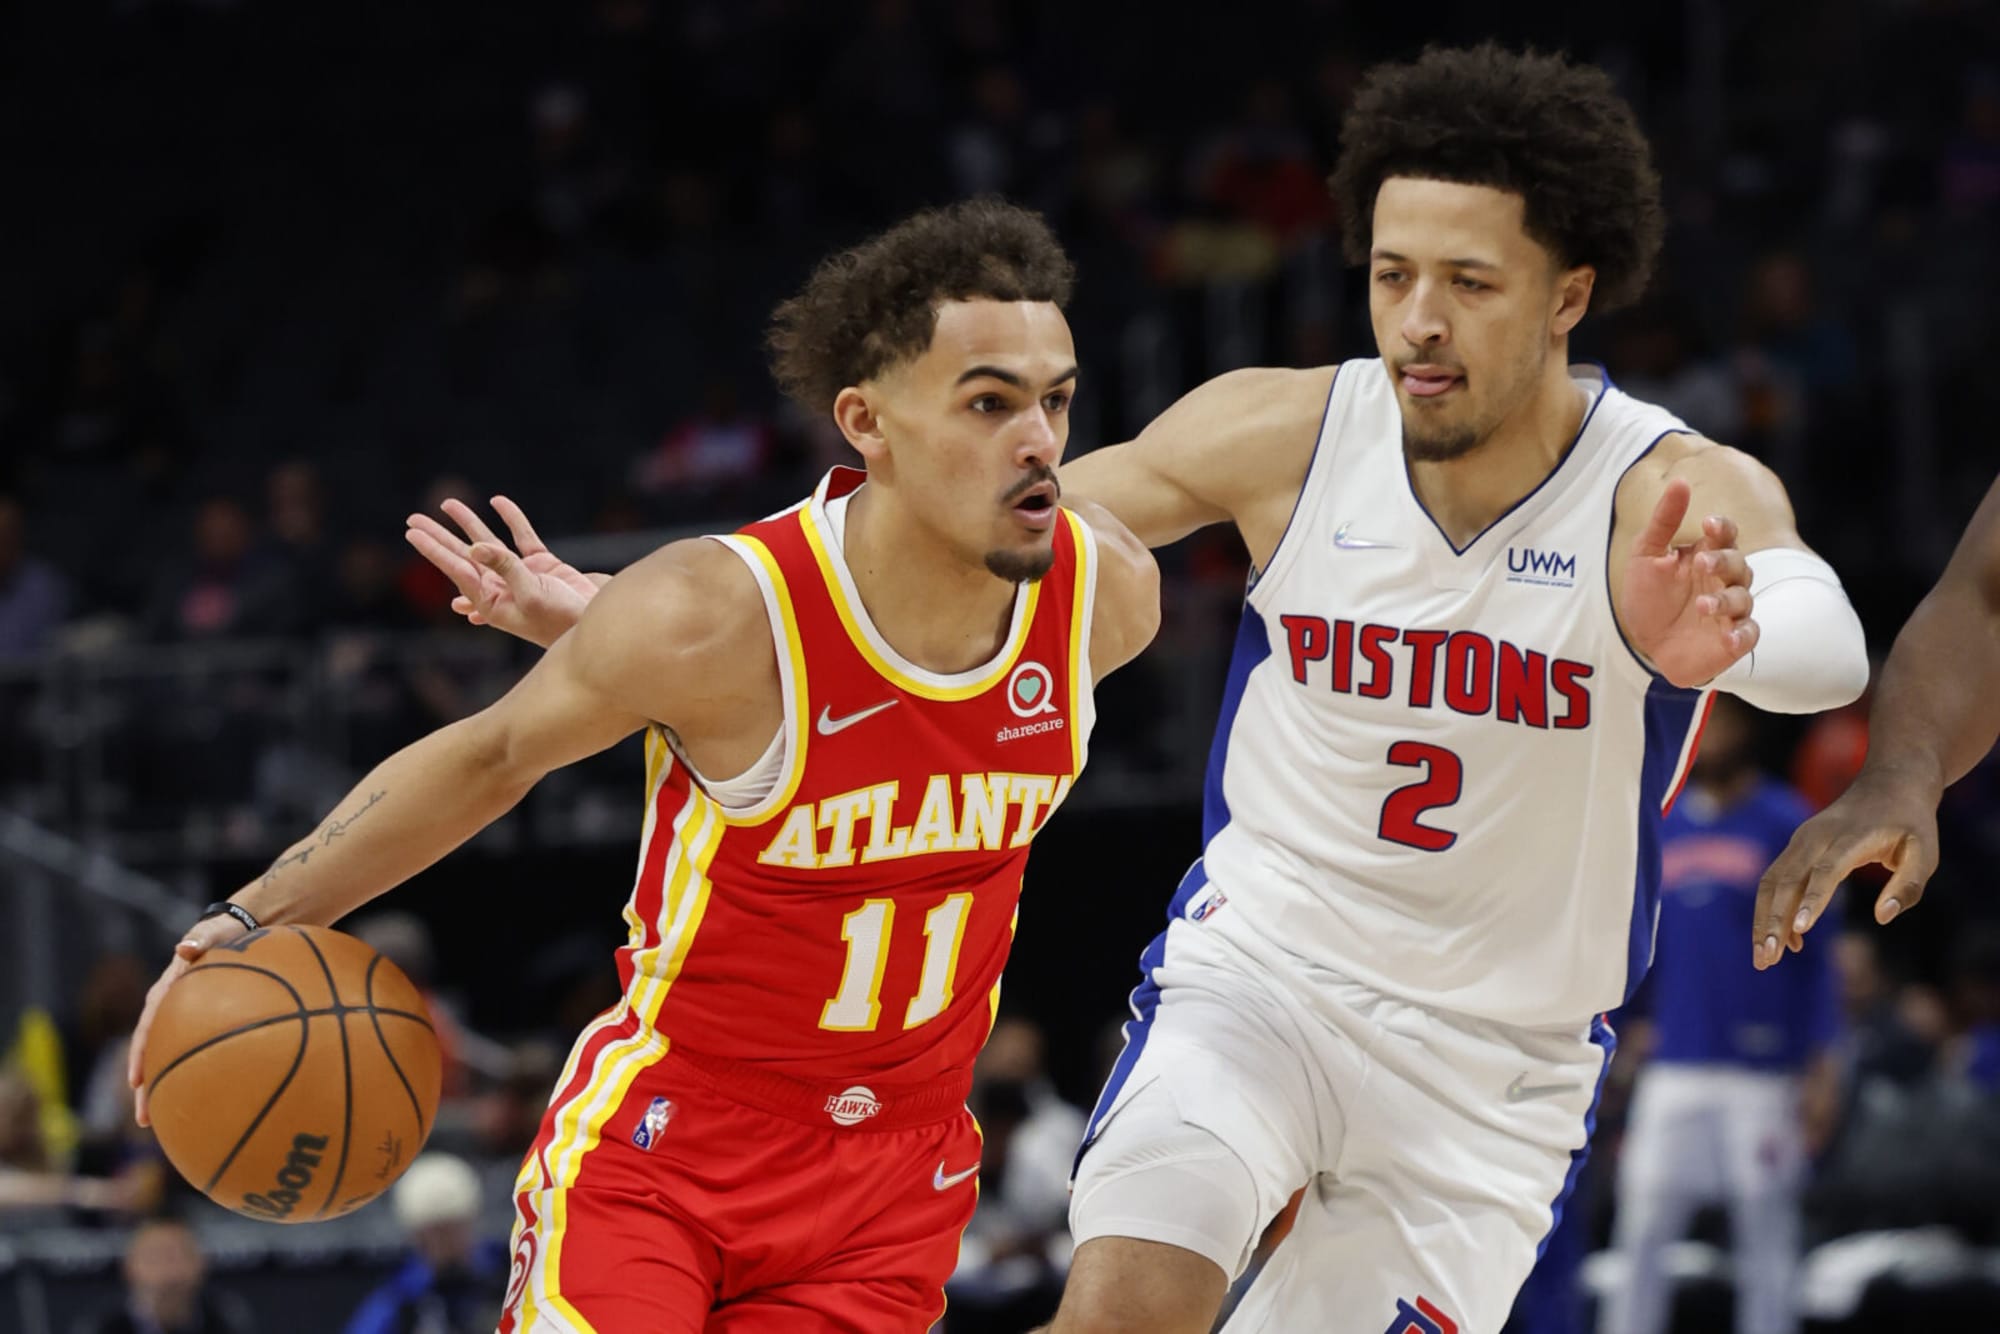 Pistons vs. Hawks preview: It's time to feel the teal - Detroit